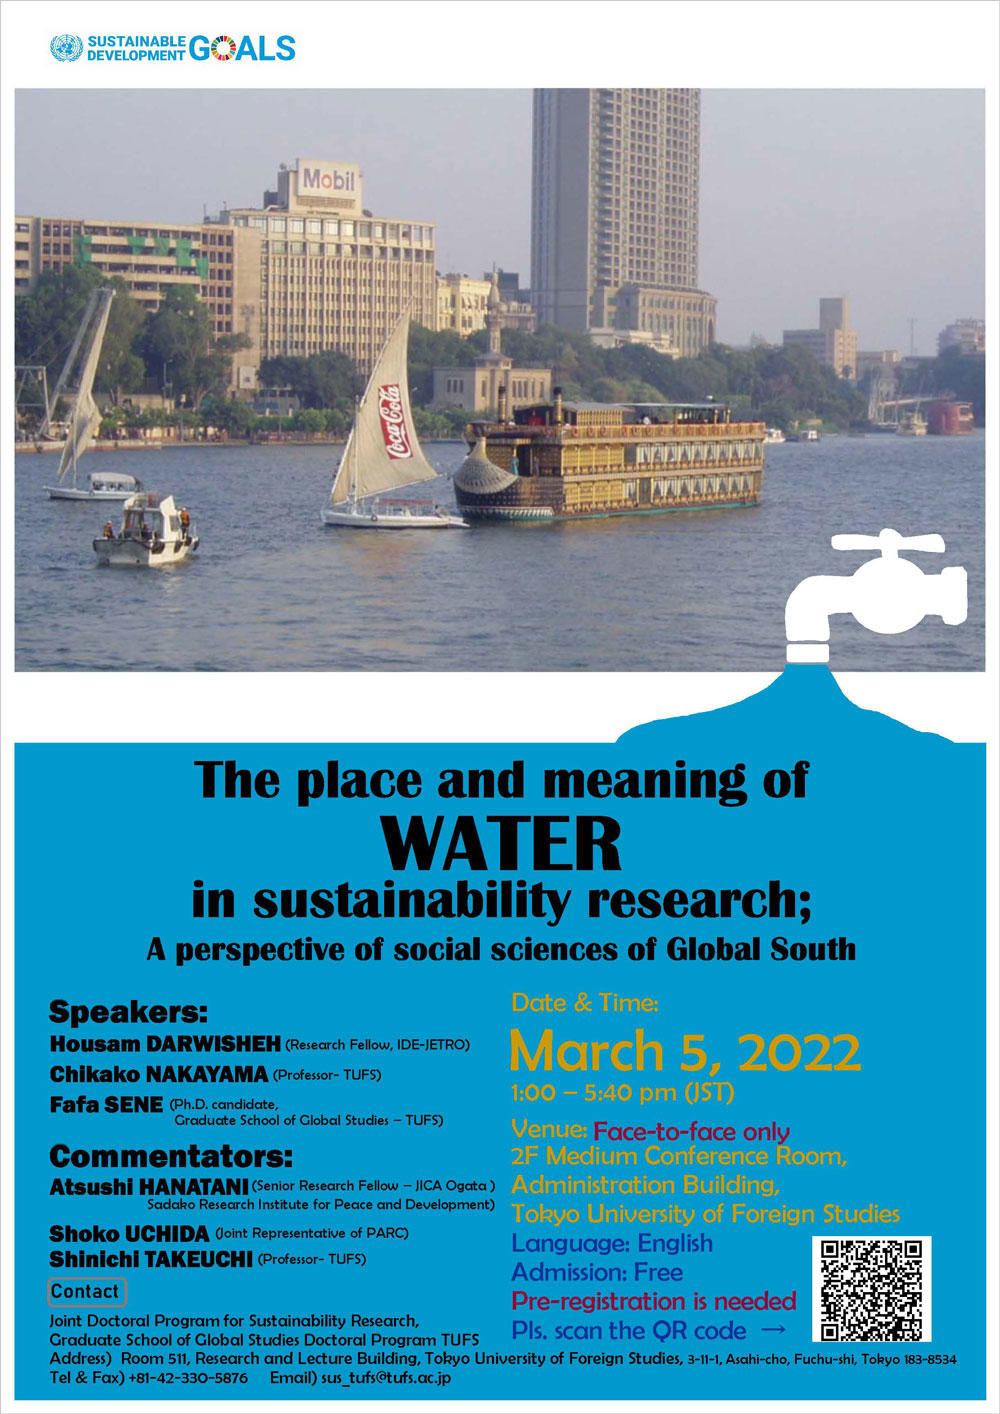 JDPSR公開シンポジウム「The place and meaning of WATER in sustainability research: A perspective of social sciences of Global South」